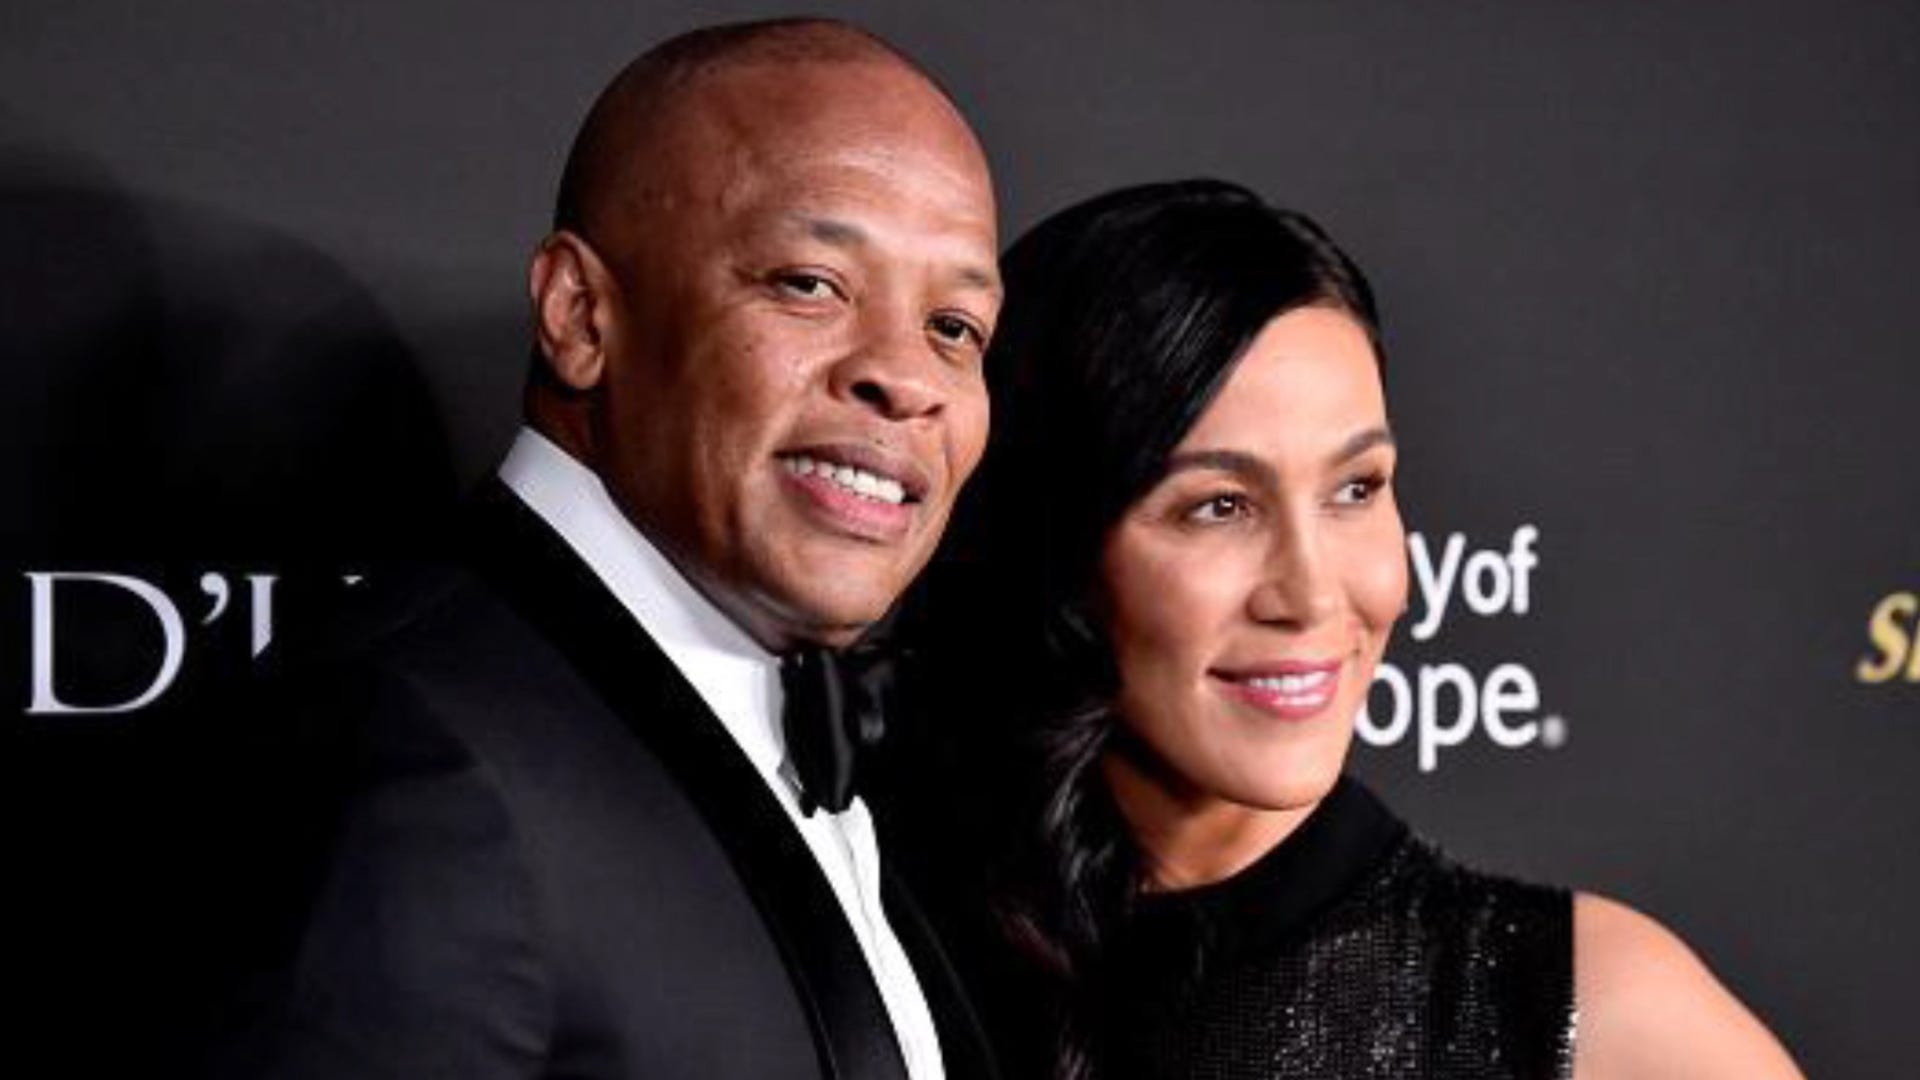 24 years of marriage down the drain as Dr. Dre’s wife Nicole Young files for Divorce, EntertainmentSA News South Africa